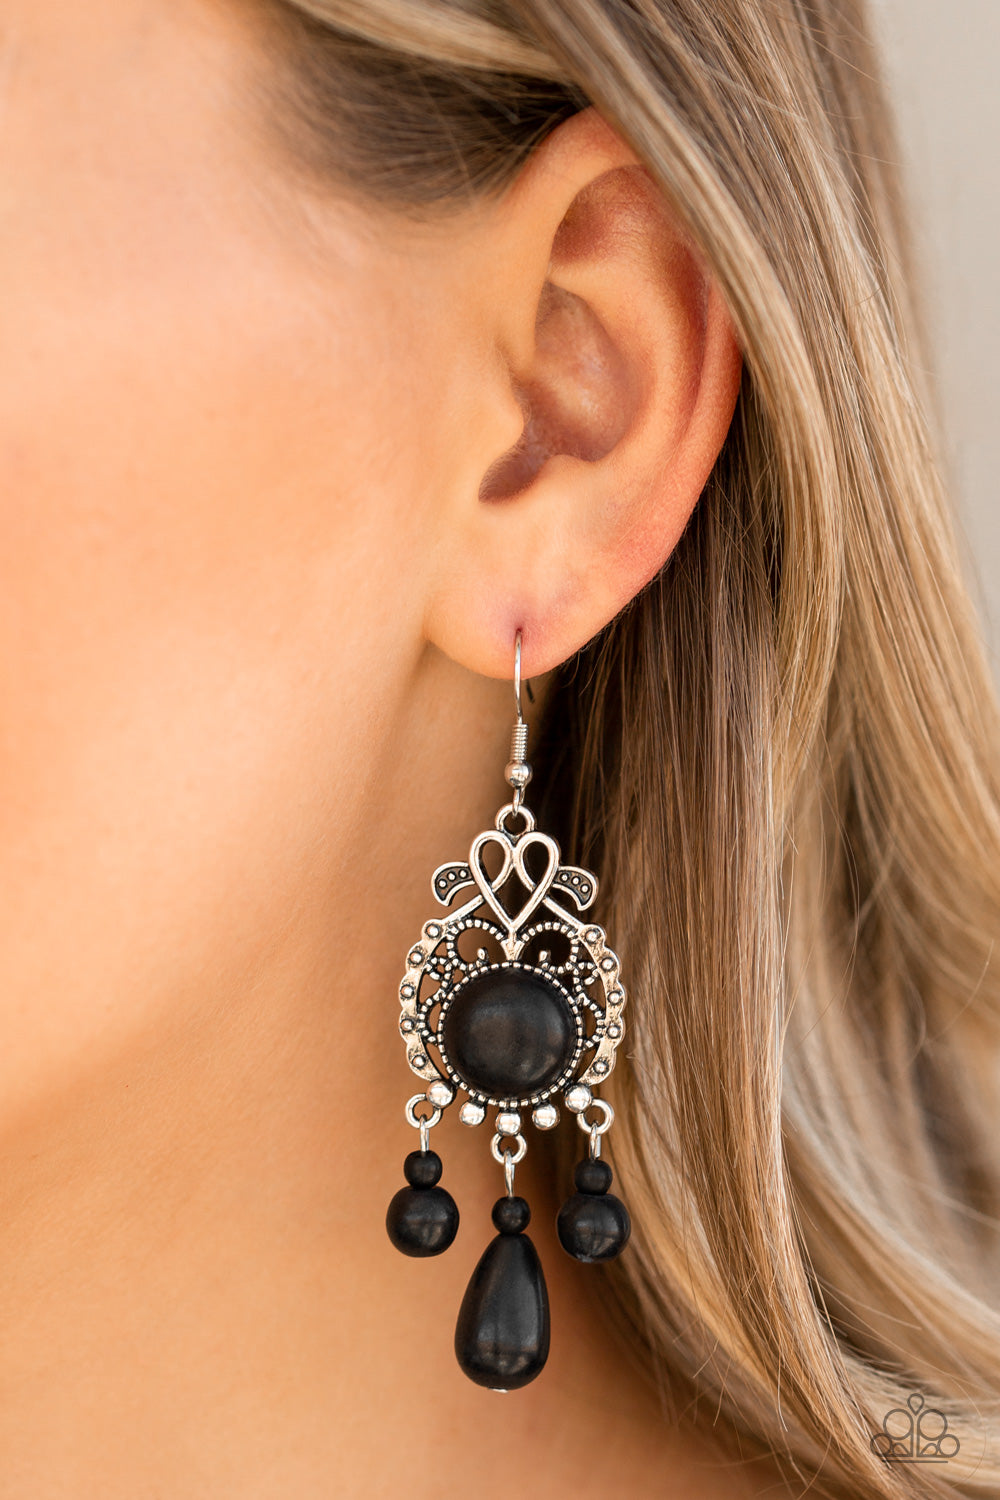 Stone Bliss - Black and Silver Fashion Earrings - Paparazzi Accessories - Dotted with a round black stone center, a frilly silver frame gives way to a beaded black stone fringe for a whimsical look. Earring attaches to a standard fishhook fitting. Sold as one pair of earrings.